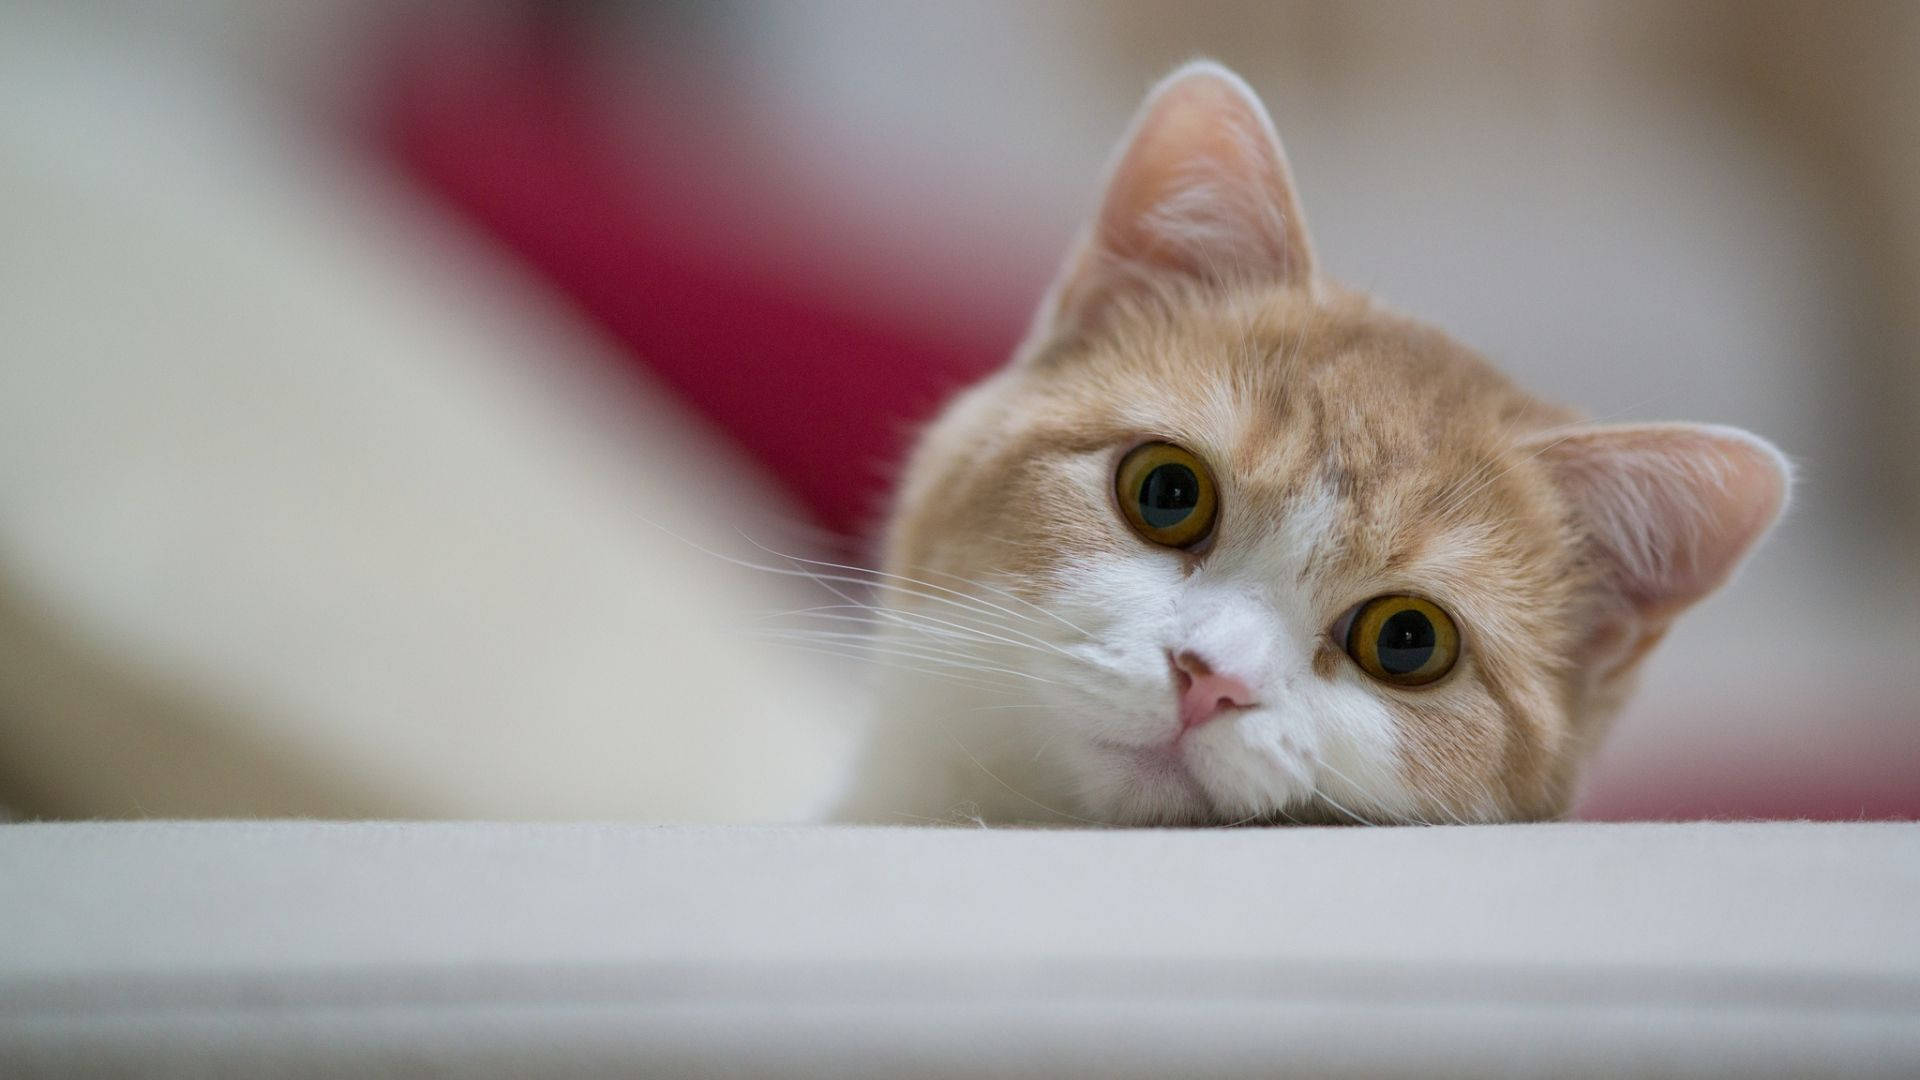 Cute cat with big yellow eyes, laying his head on a white table with his eyes looking at you.